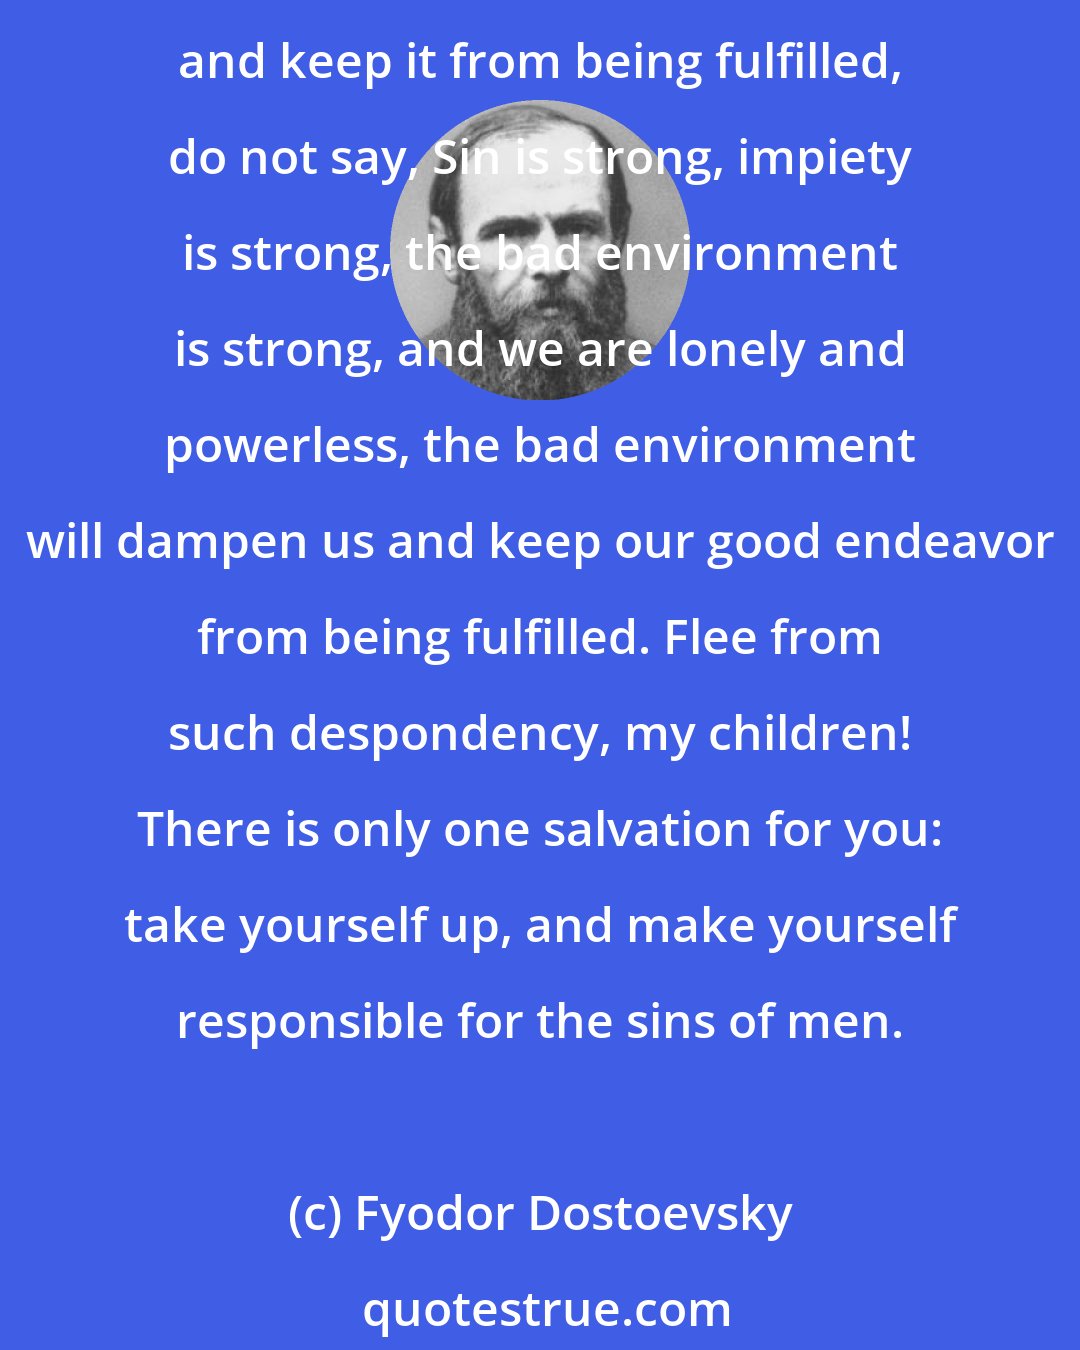 Fyodor Dostoevsky: My friends, ask gladness from God. Be glad as children, as birds in the sky. And let man's sin not disturb you in your efforts, do not feat that it will dampen your endeavor and keep it from being fulfilled, do not say, Sin is strong, impiety is strong, the bad environment is strong, and we are lonely and powerless, the bad environment will dampen us and keep our good endeavor from being fulfilled. Flee from such despondency, my children! There is only one salvation for you: take yourself up, and make yourself responsible for the sins of men.